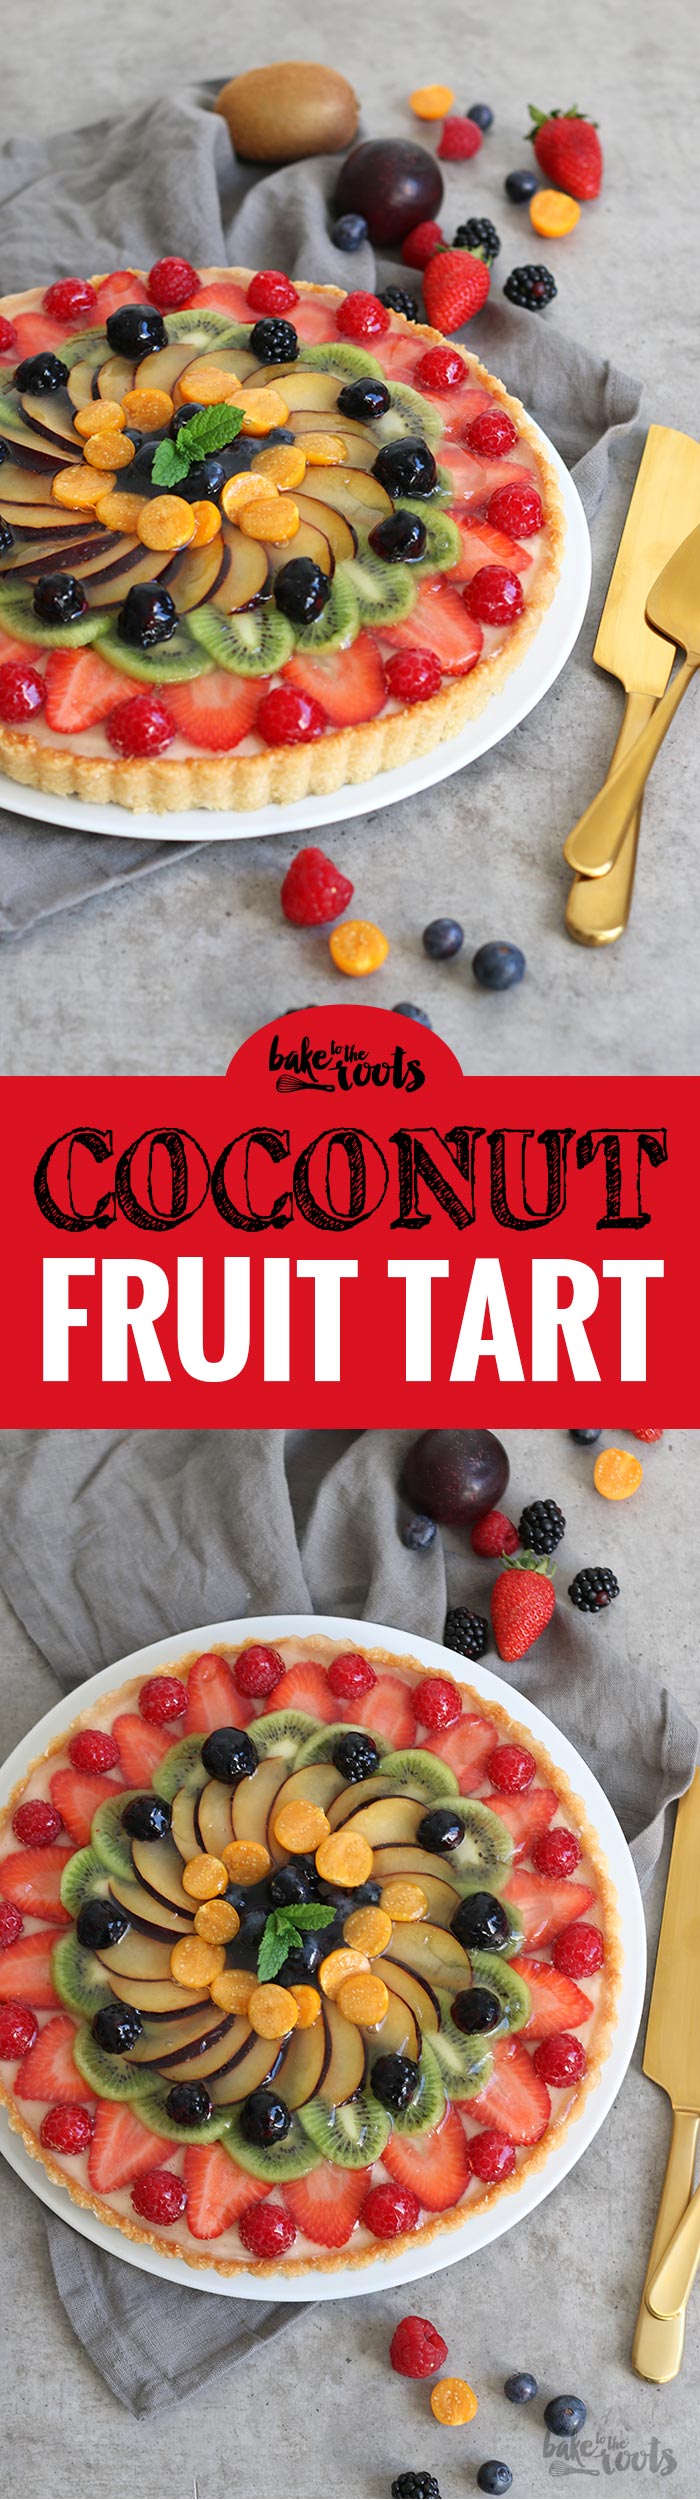 Coconut Pudding Tart with Fresh Fruits | Bake to the roots